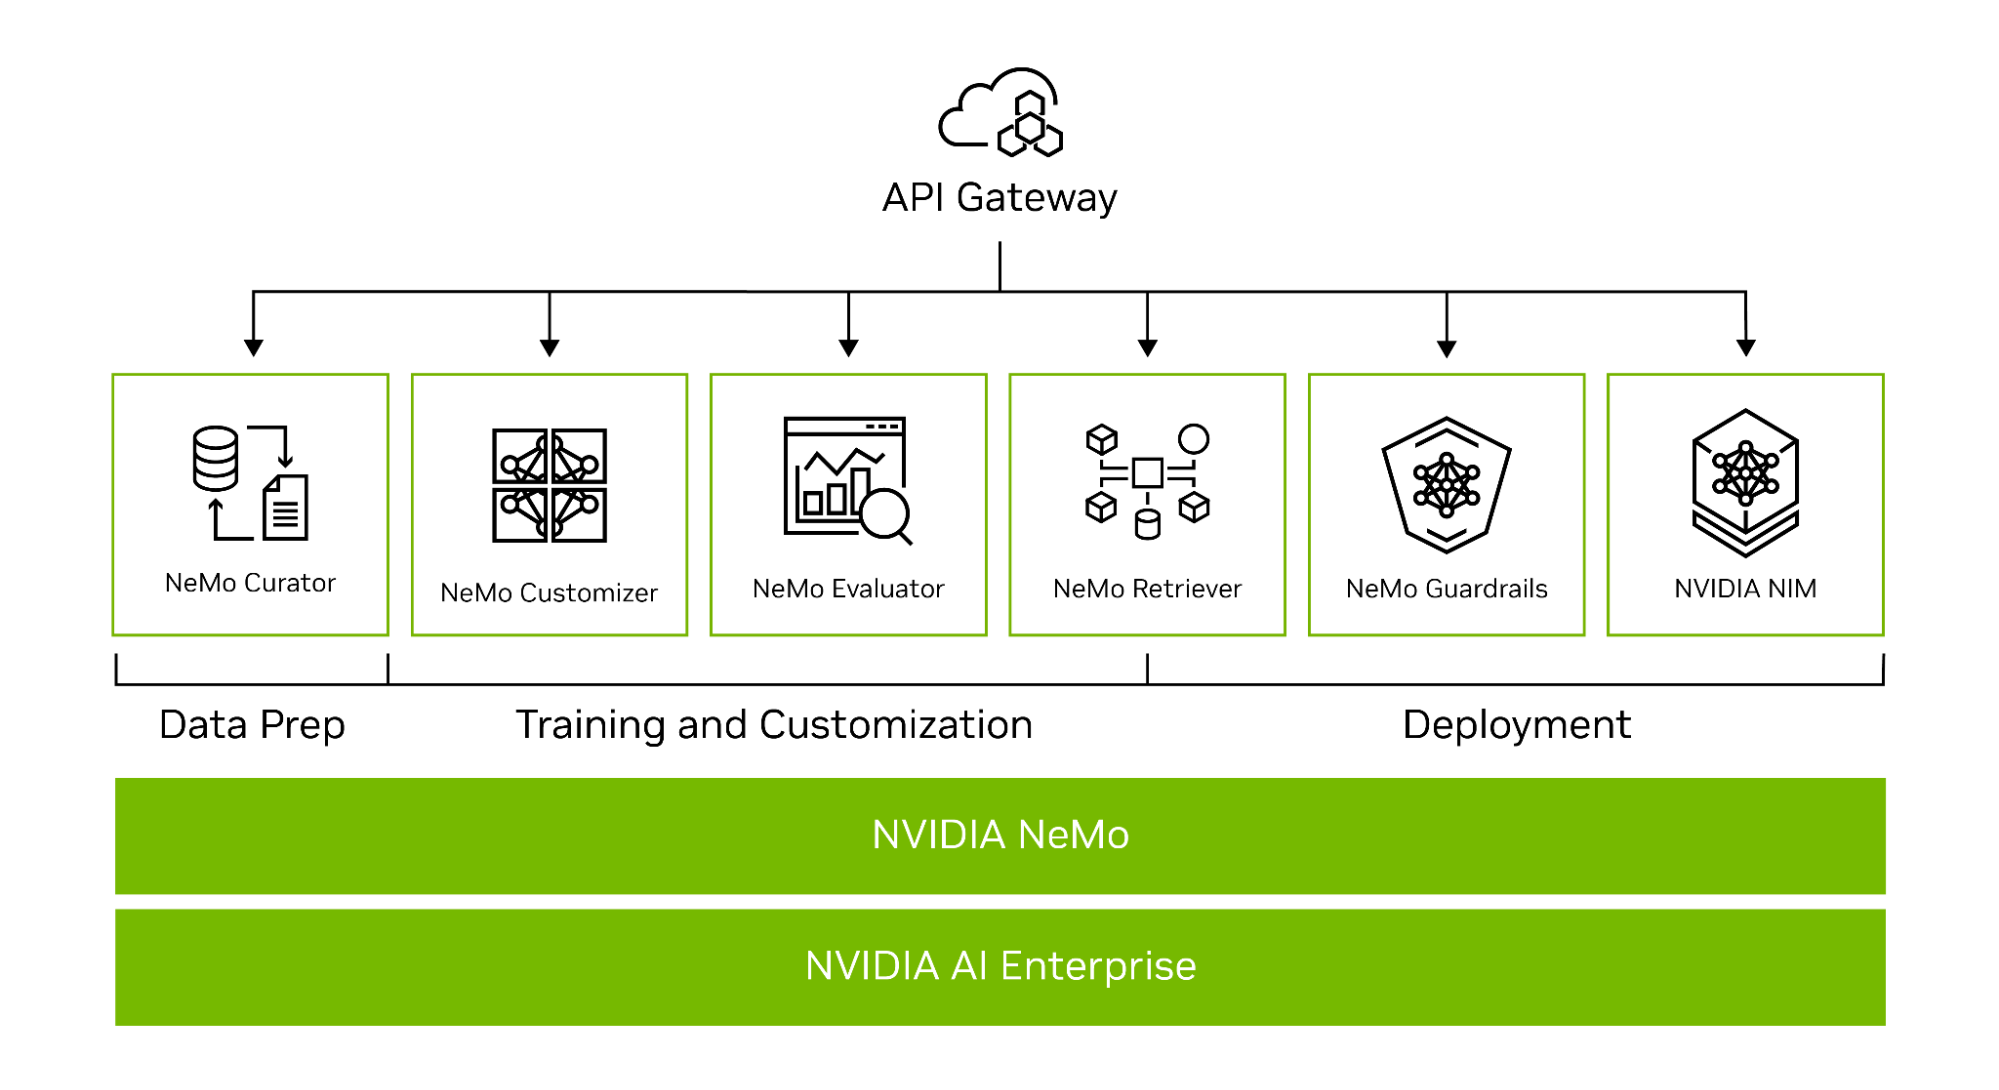 Image showing the offerings of NVIDIA NeMo, the platform for developing custom generative AI.